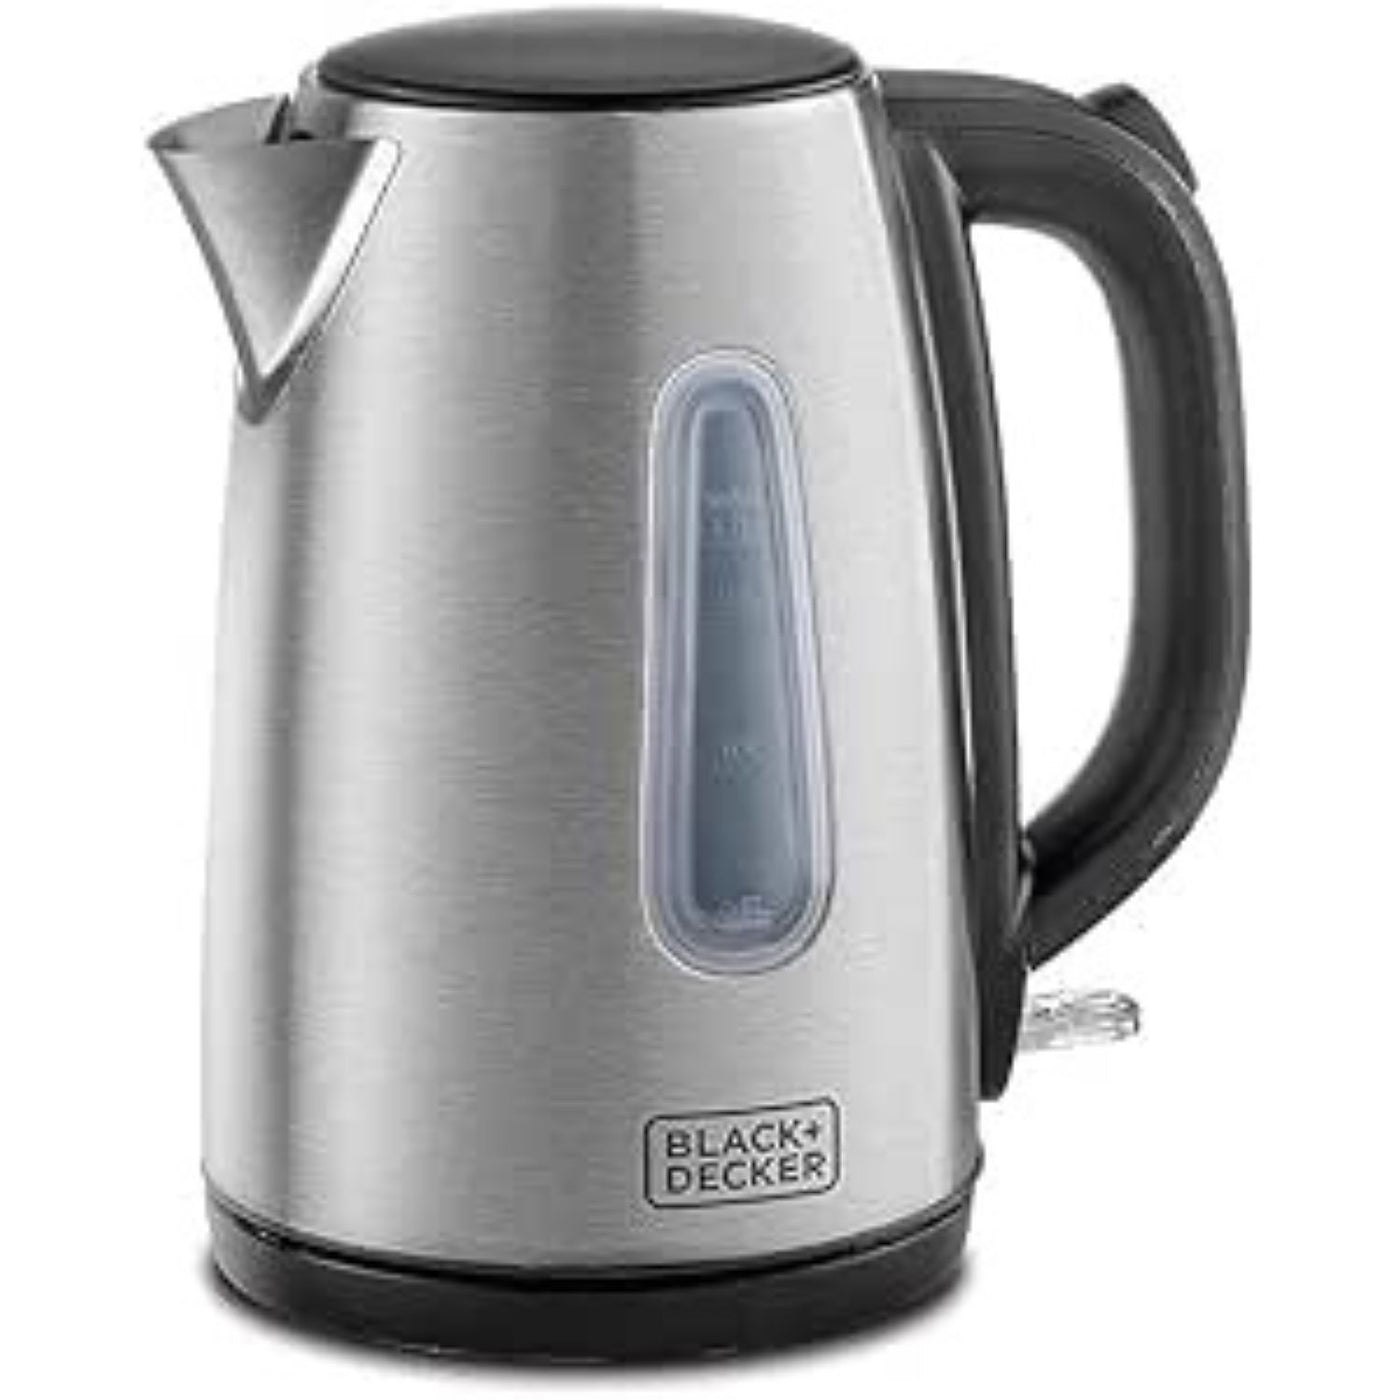 1.7L Cordless Electric Kettle With Water-Level Indicator, Removable Filter, Auto Shut-Off And Stainless Steel Body, Perfect for Warm Beverages, Silver